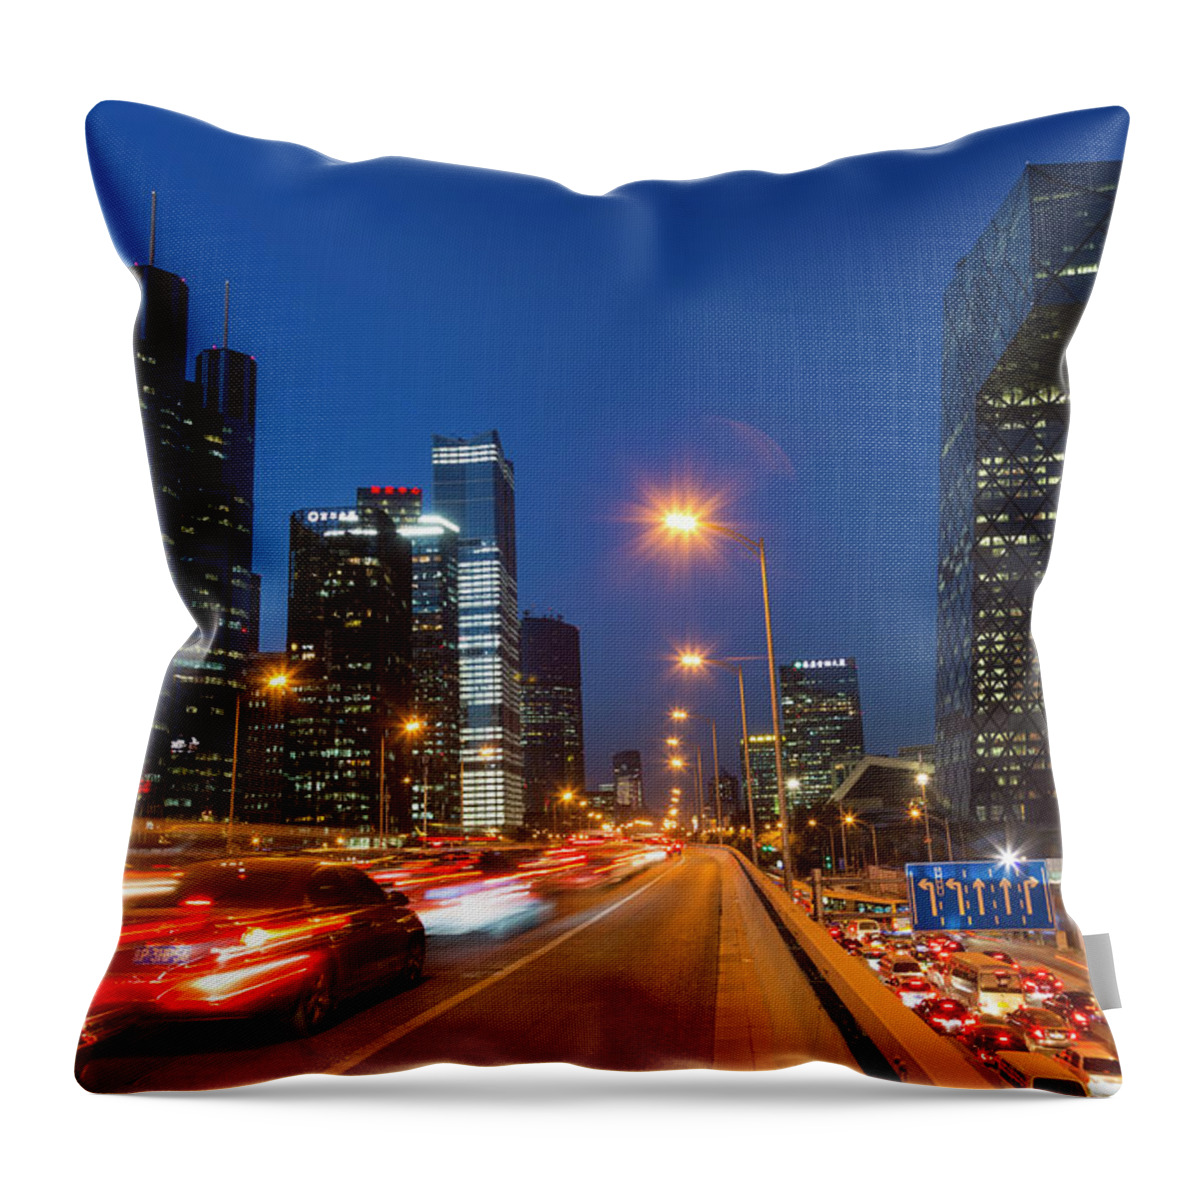 Chinese Culture Throw Pillow featuring the photograph Central Business District At Dusk by Peter Adams